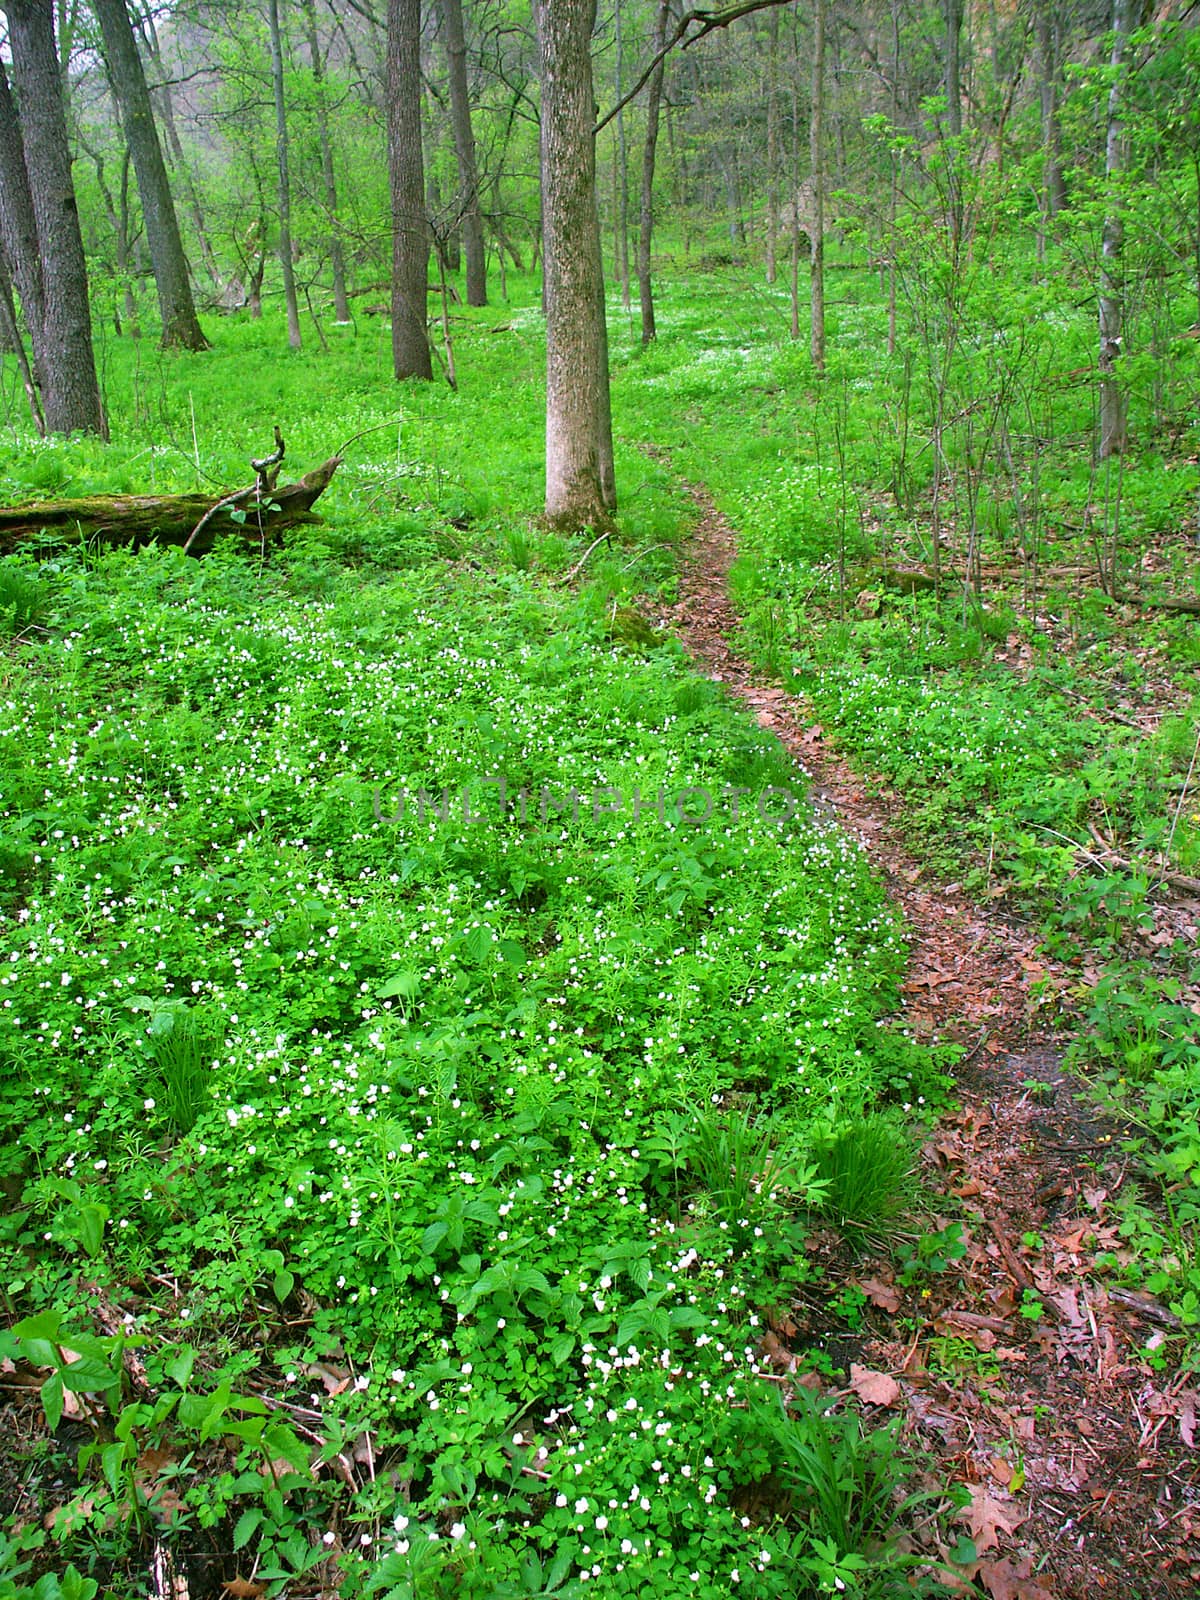 Narrow trail through understory vegetation at Apple River Canyon State Park of Illinois.